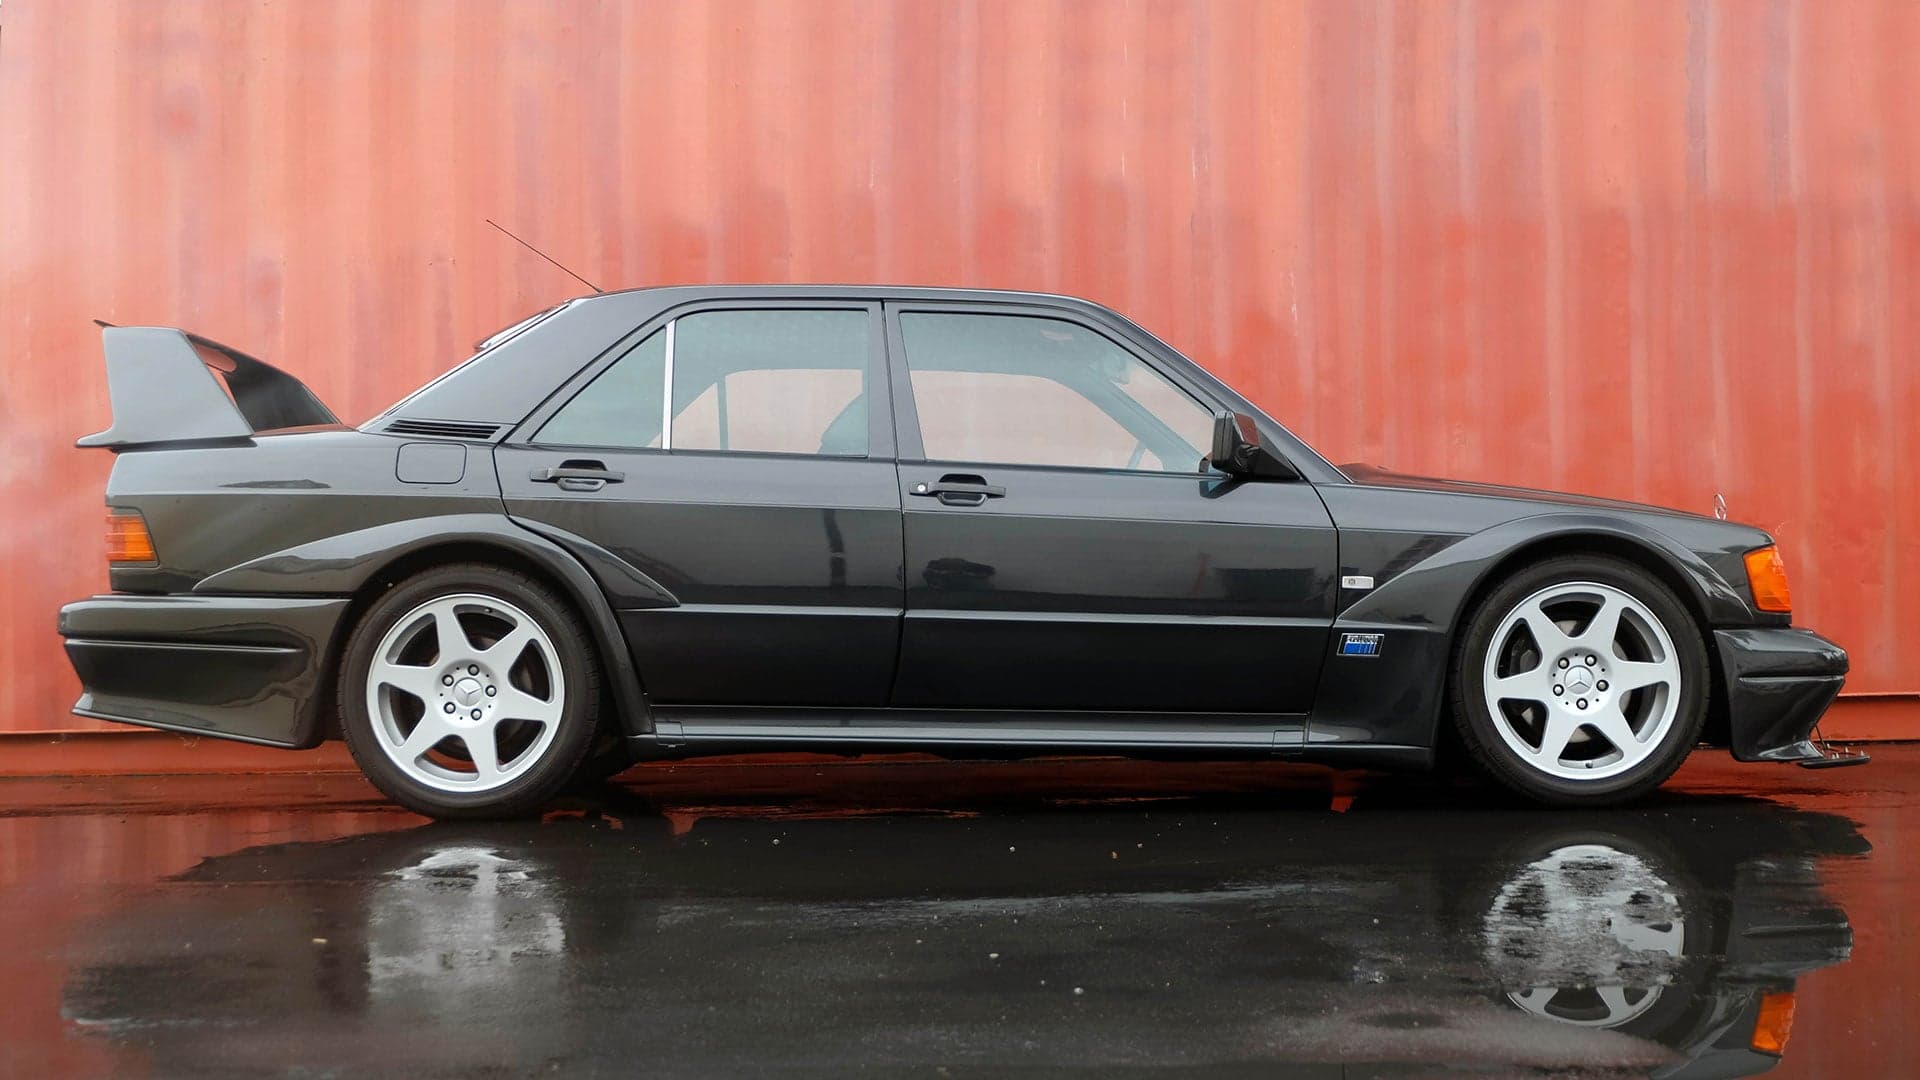 We Talked to the Dealer Selling a Mercedes-Benz 190E Evo II for $279,000